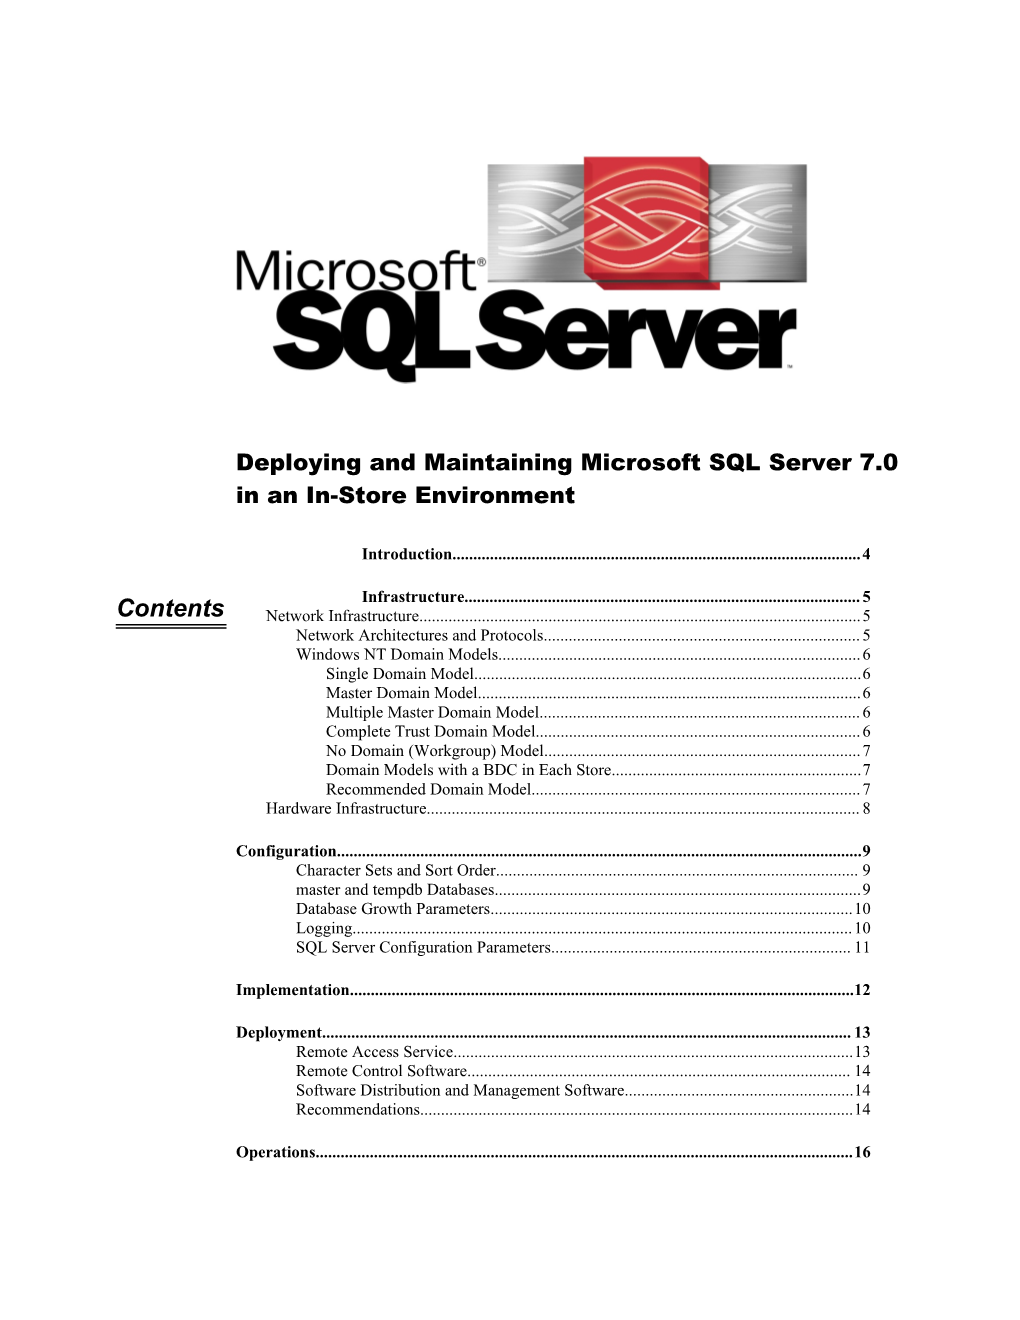 Deploying and Maintaining Microsoft Sqlserver 7.0 in an In-Store Environment